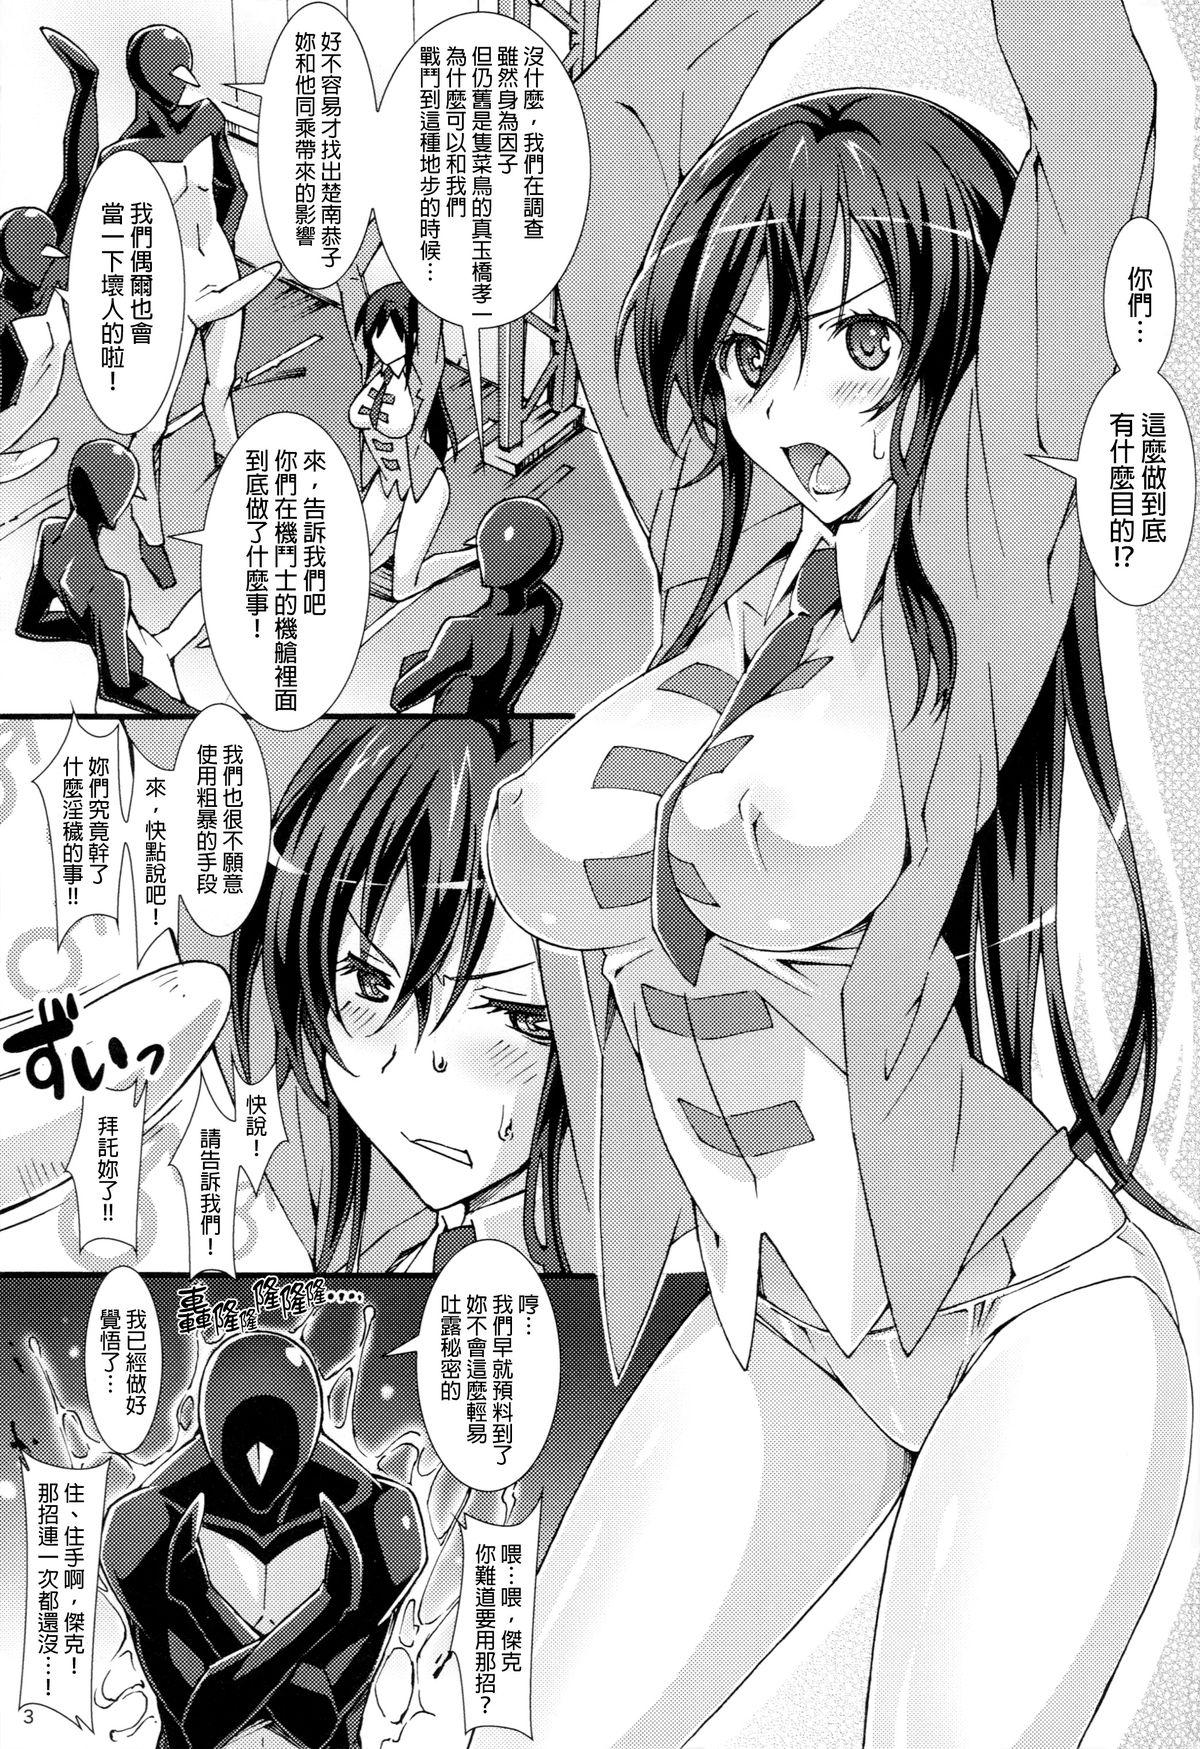 Solo Female P-mating - Kenzen robo daimidaler Livesex - Page 2